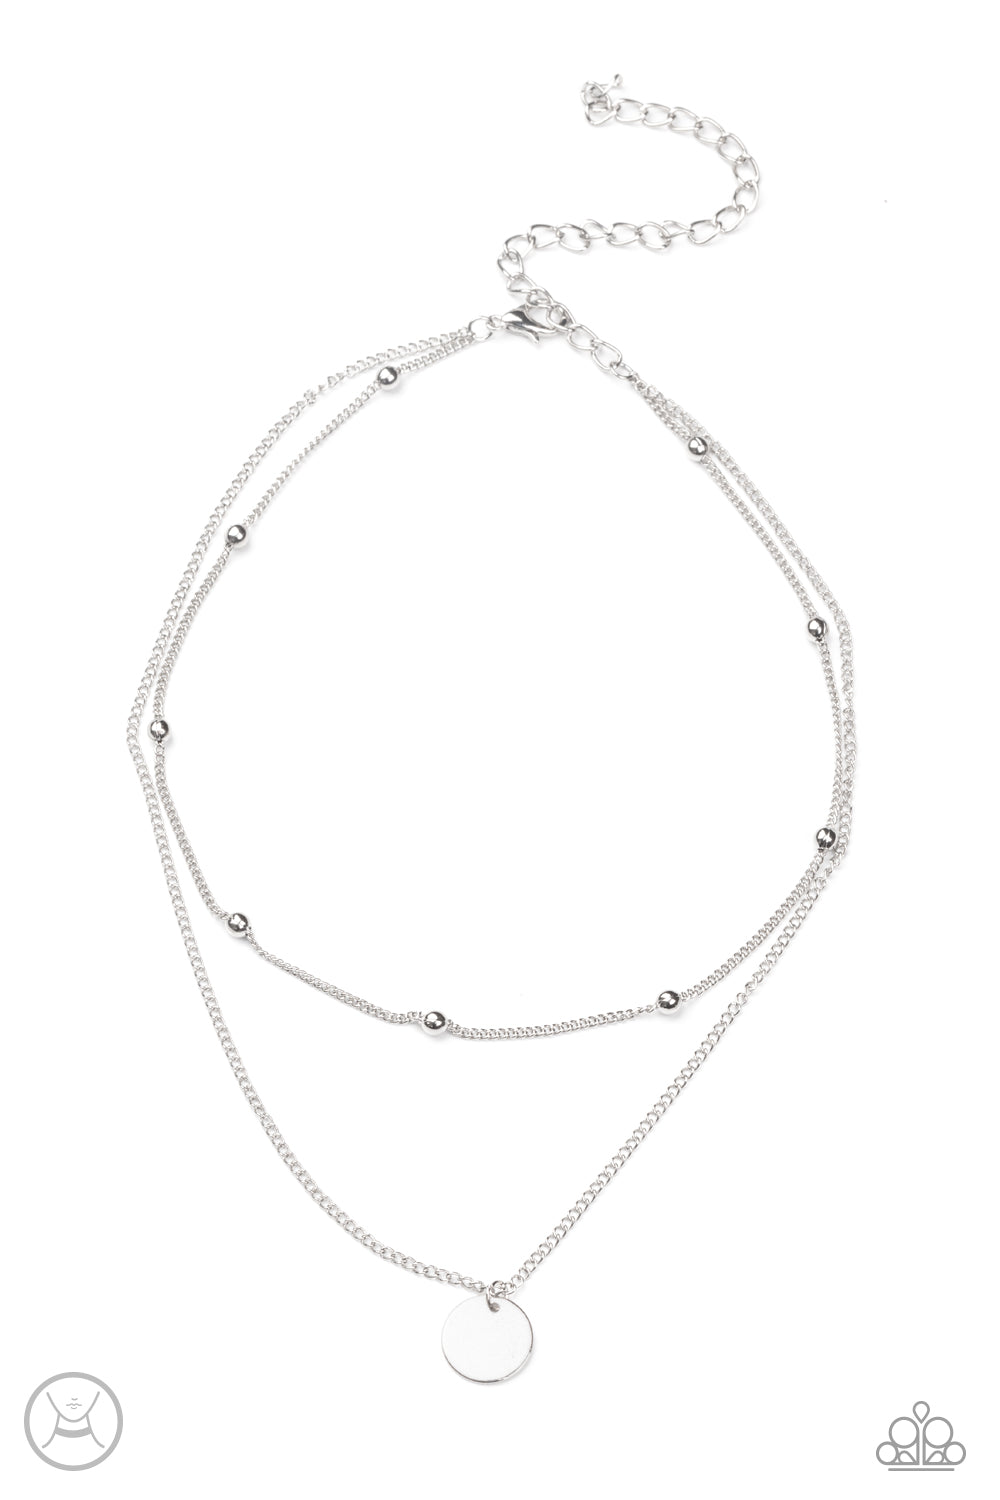 Modestly Minimalist Silver Choker Necklace - Paparazzi Accessories  Infused with a silver beaded chain, a dainty silver disc slides along a classic silver chain around the neck, creating sleek layers. Features an adjustable clasp closure.  All Paparazzi Accessories are lead free and nickel free!  Sold as one individual choker necklace. Includes one pair of matching earrings.